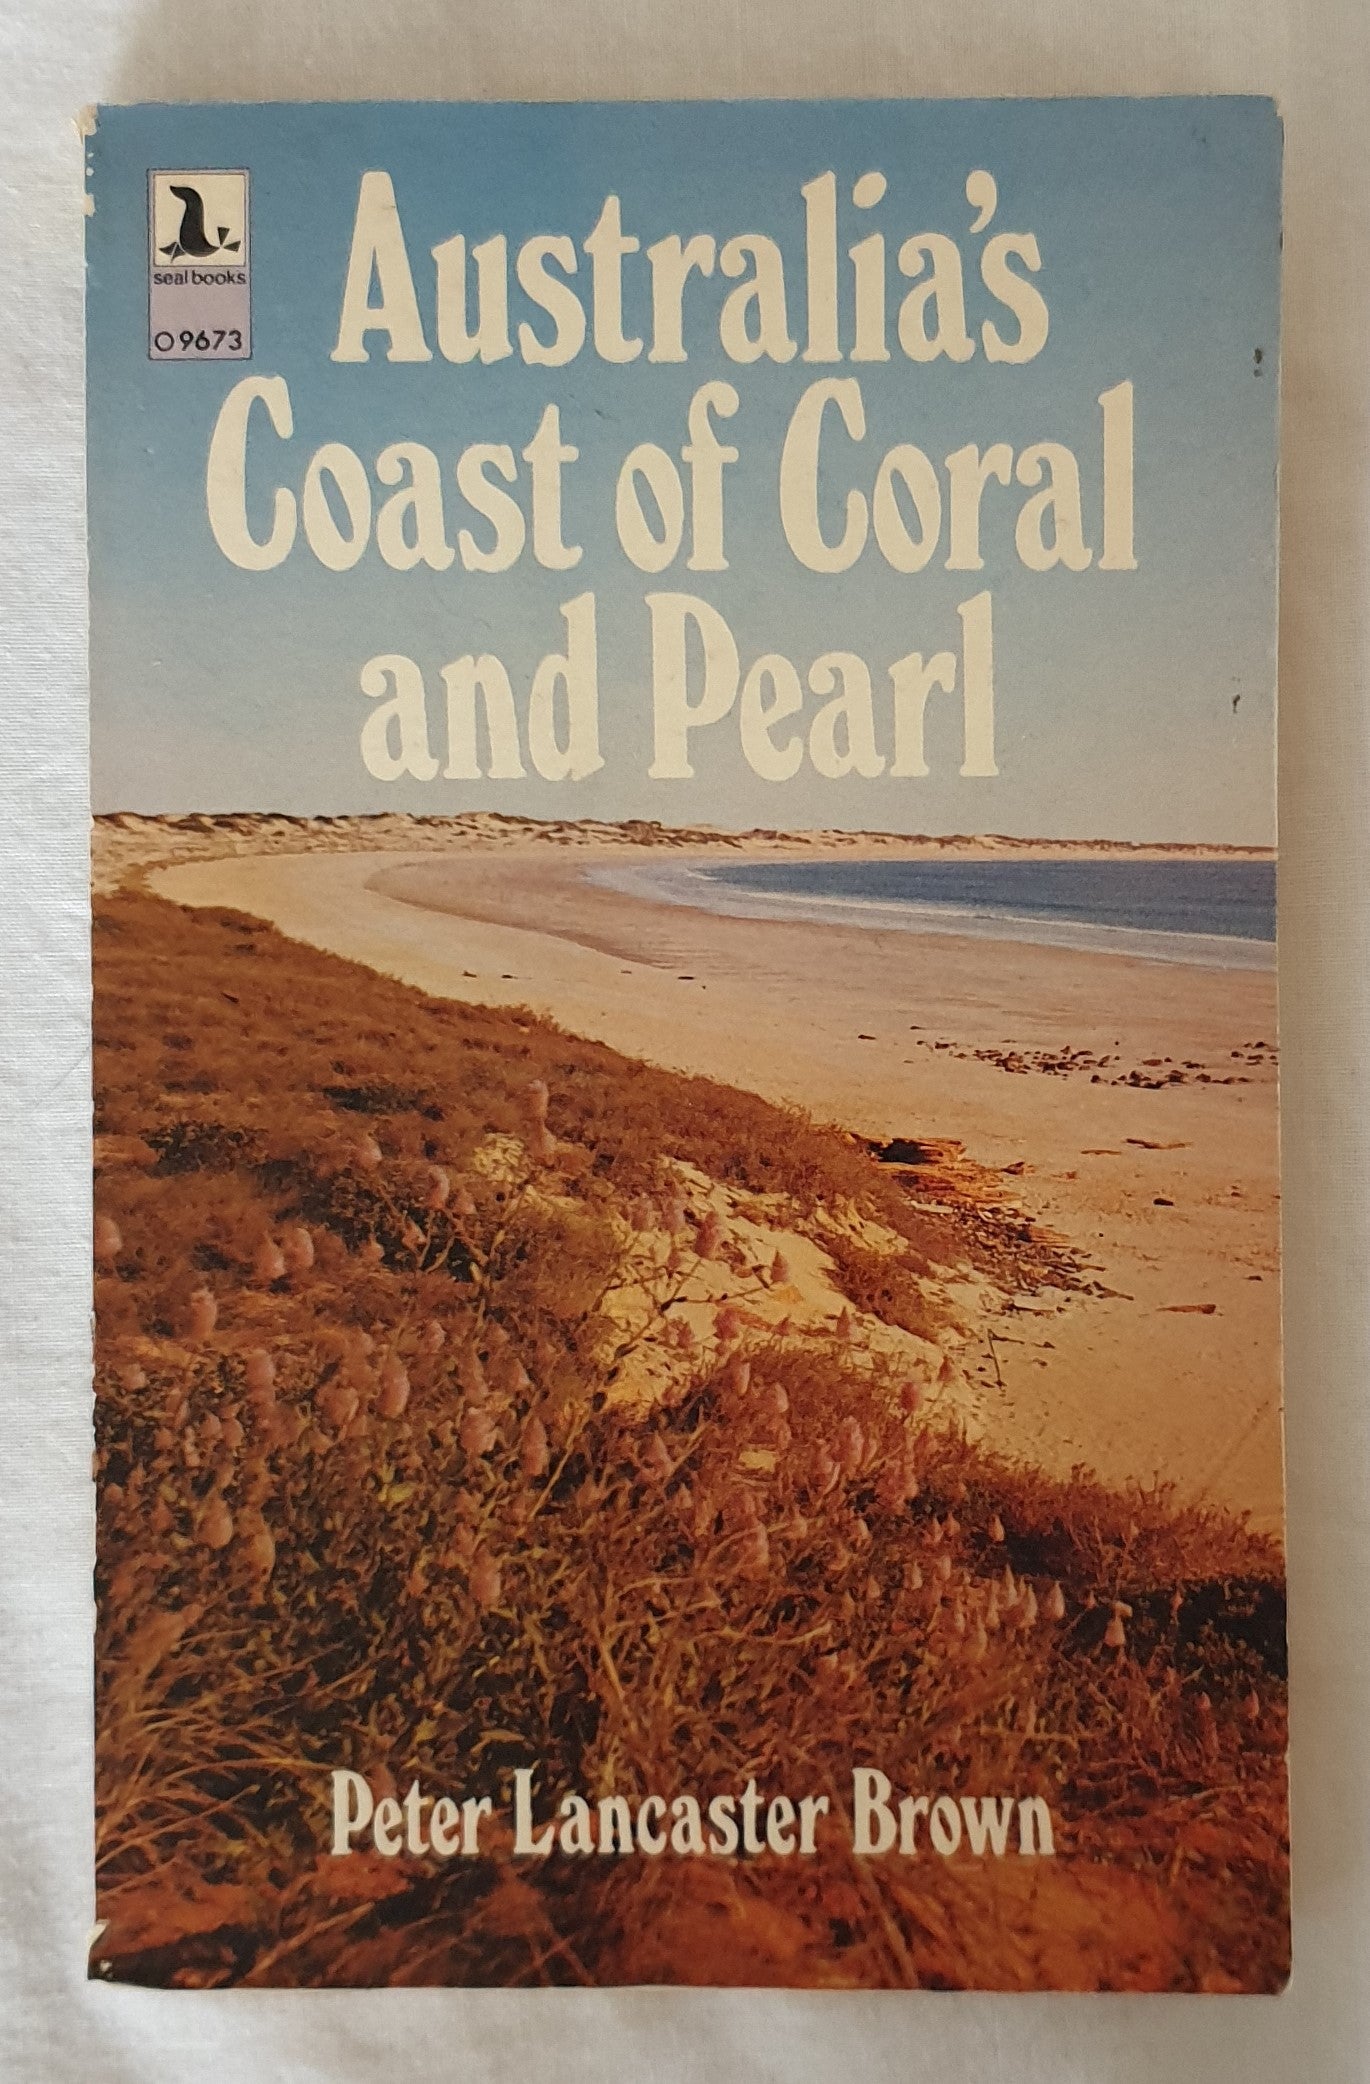 Australia's Coast of Coral and Pearl  by Peter Lancaster Brown